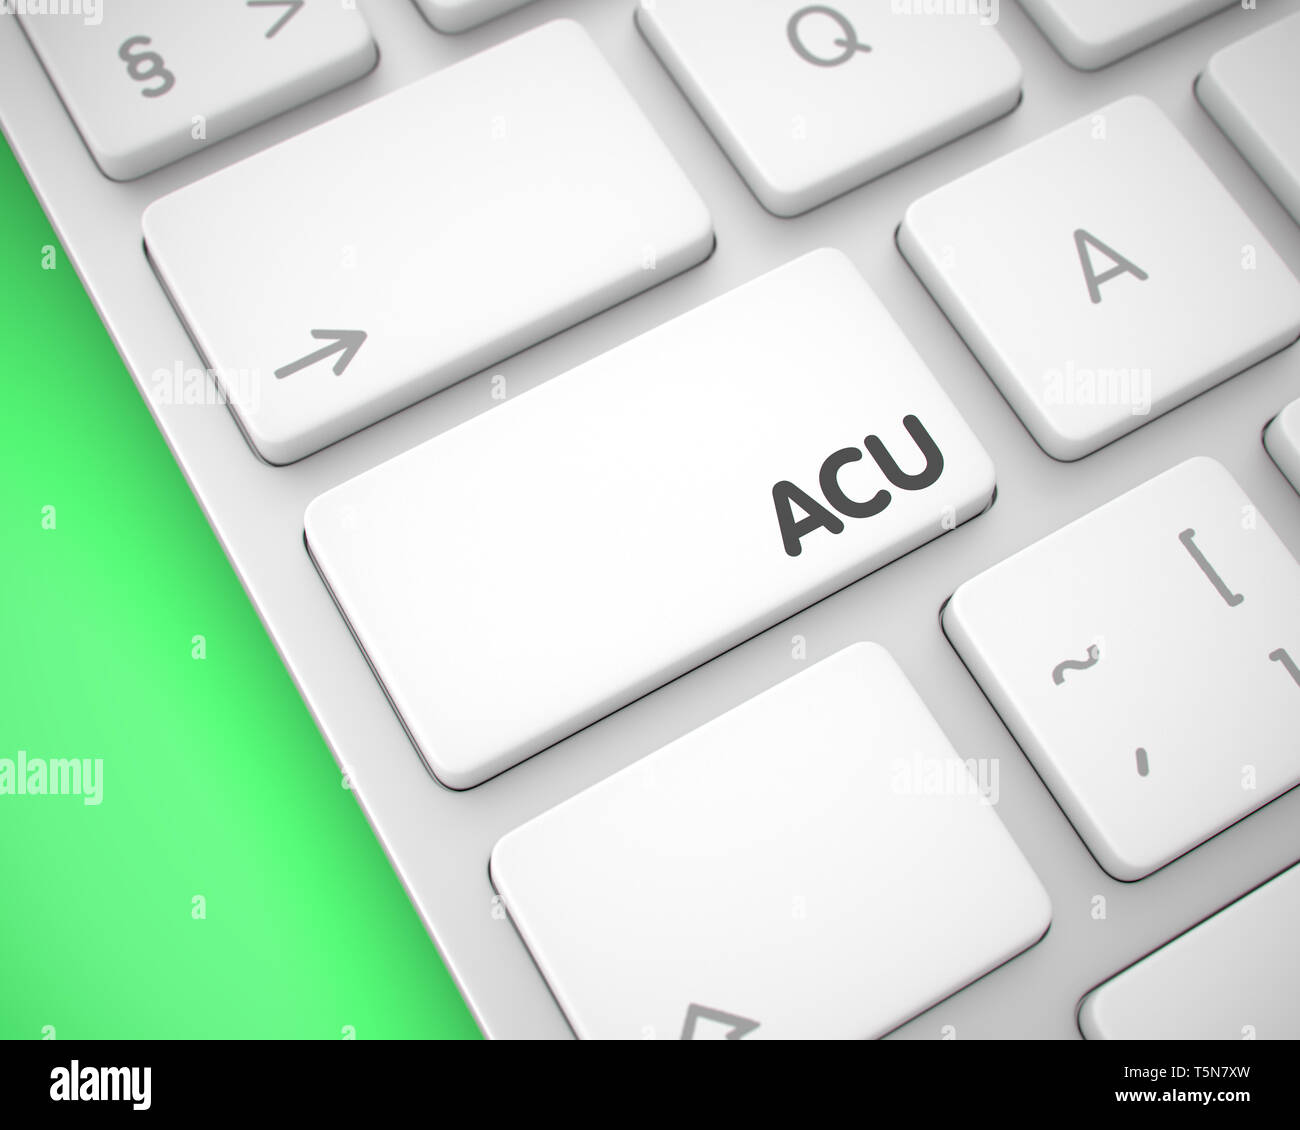 Business Concept: ACU - Average Concurrent Users on Modern Keyboard lying on the Green Background. Conceptual Keyboard with ACU - Average Concurrent U Stock Photo